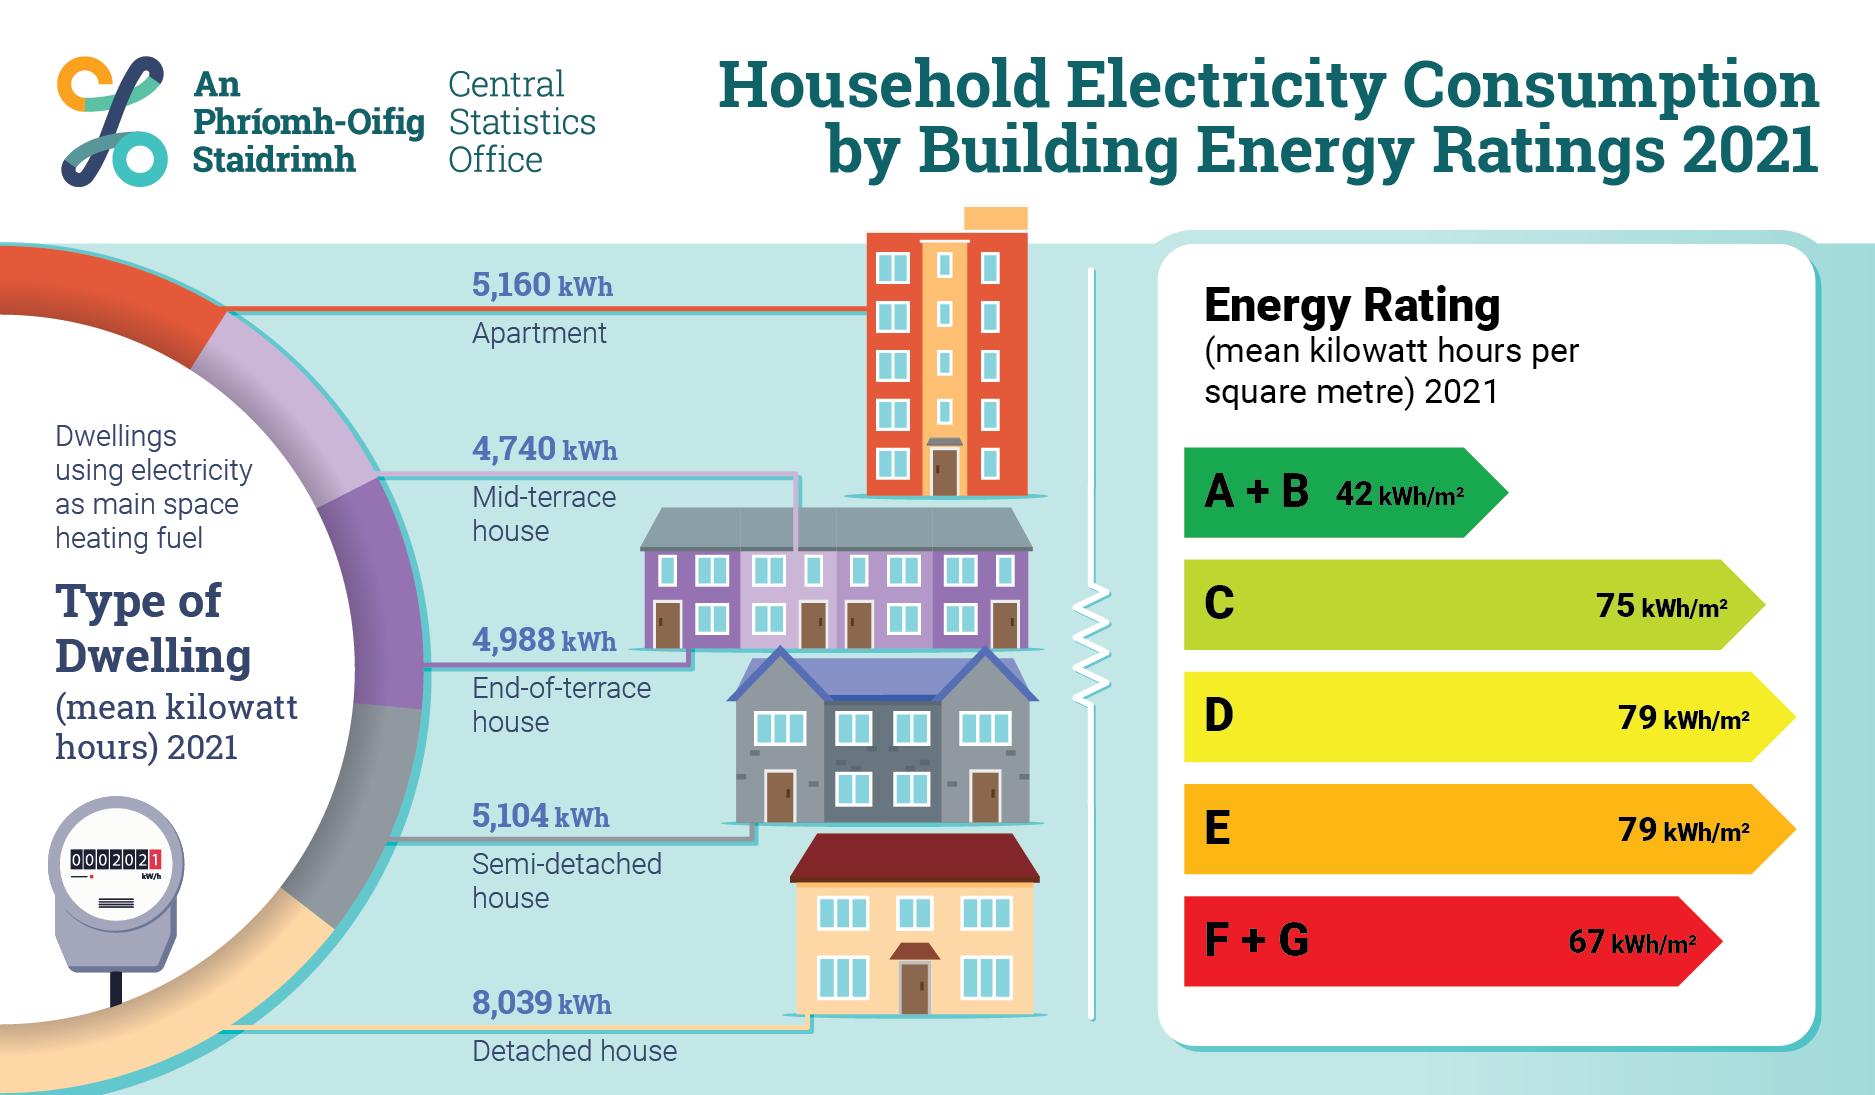 Environment Energy Ratings And Electricity Consumption 2021 Infographic ENG 